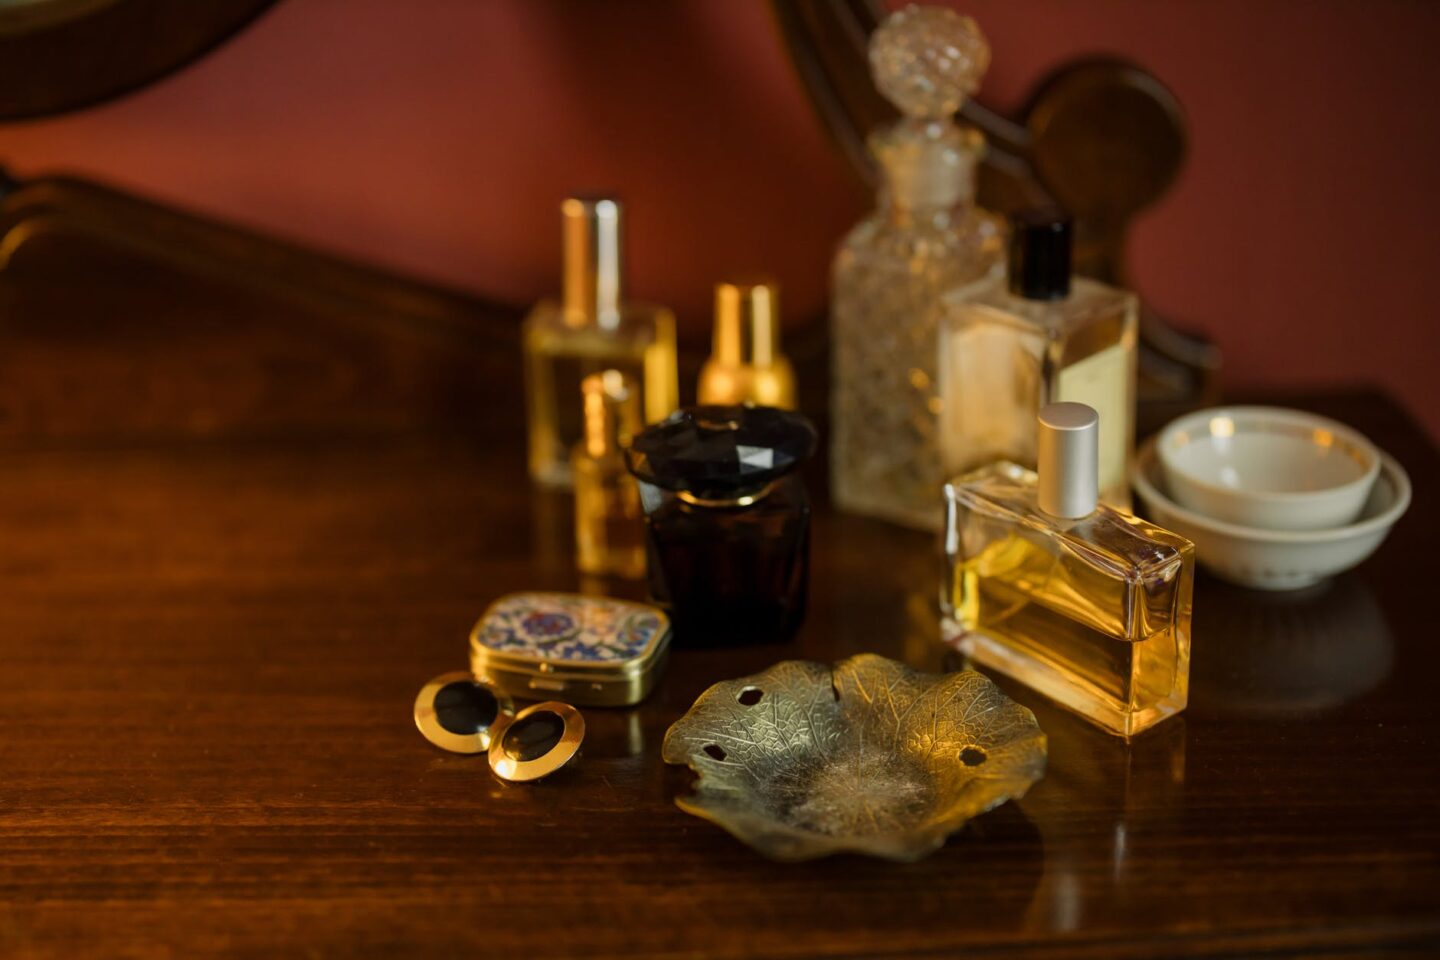 perfumes on the table